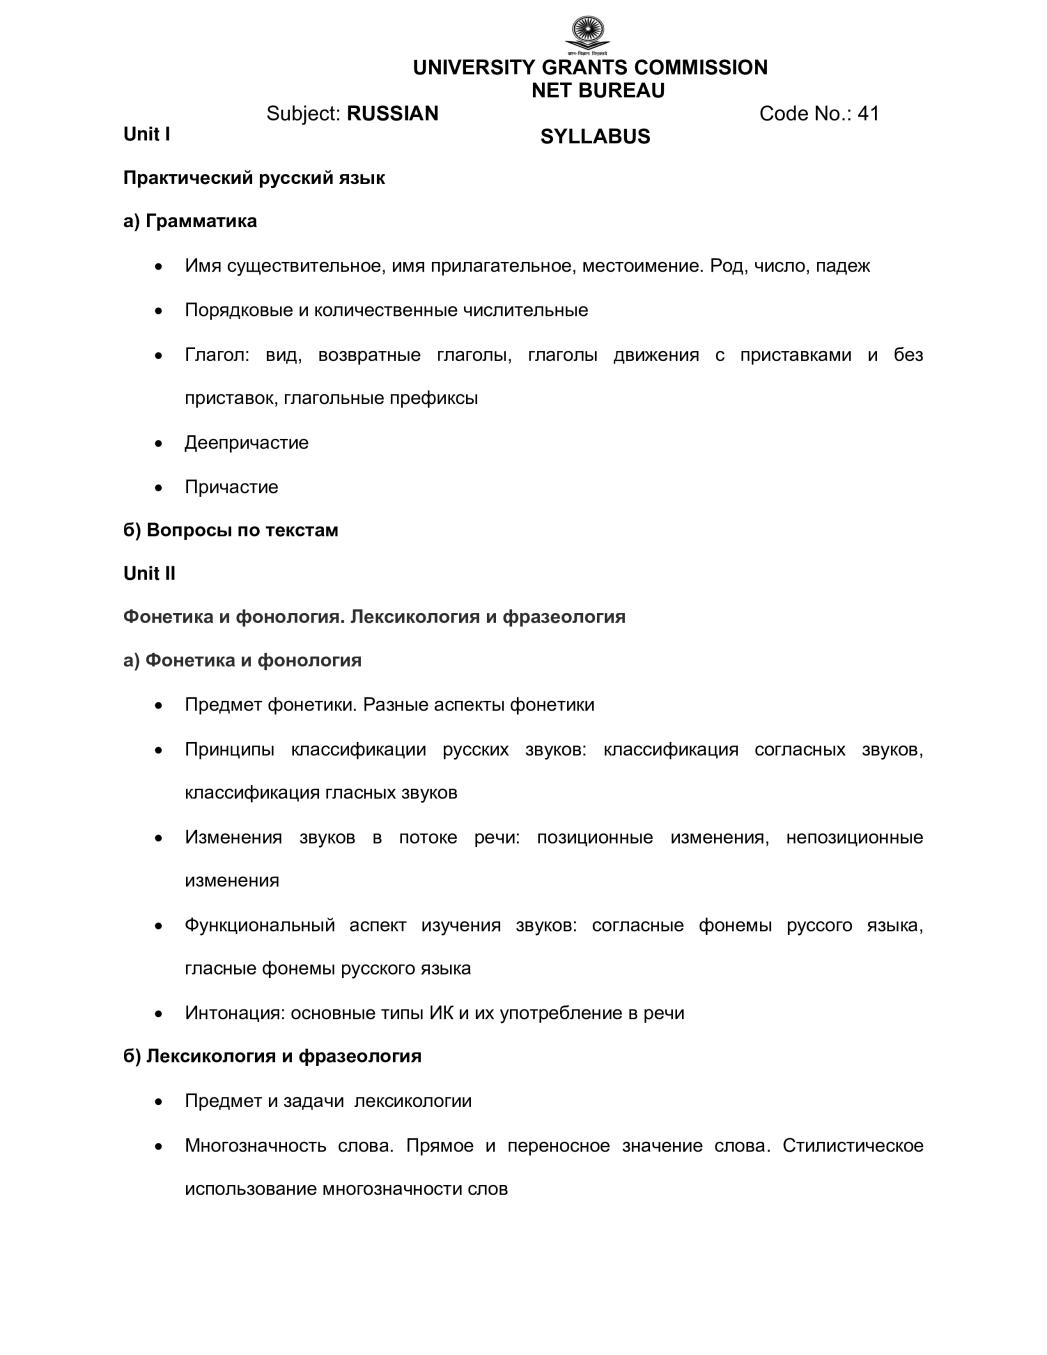 UGC NET Syllabus for Russian 2020 in Hindi - Page 1